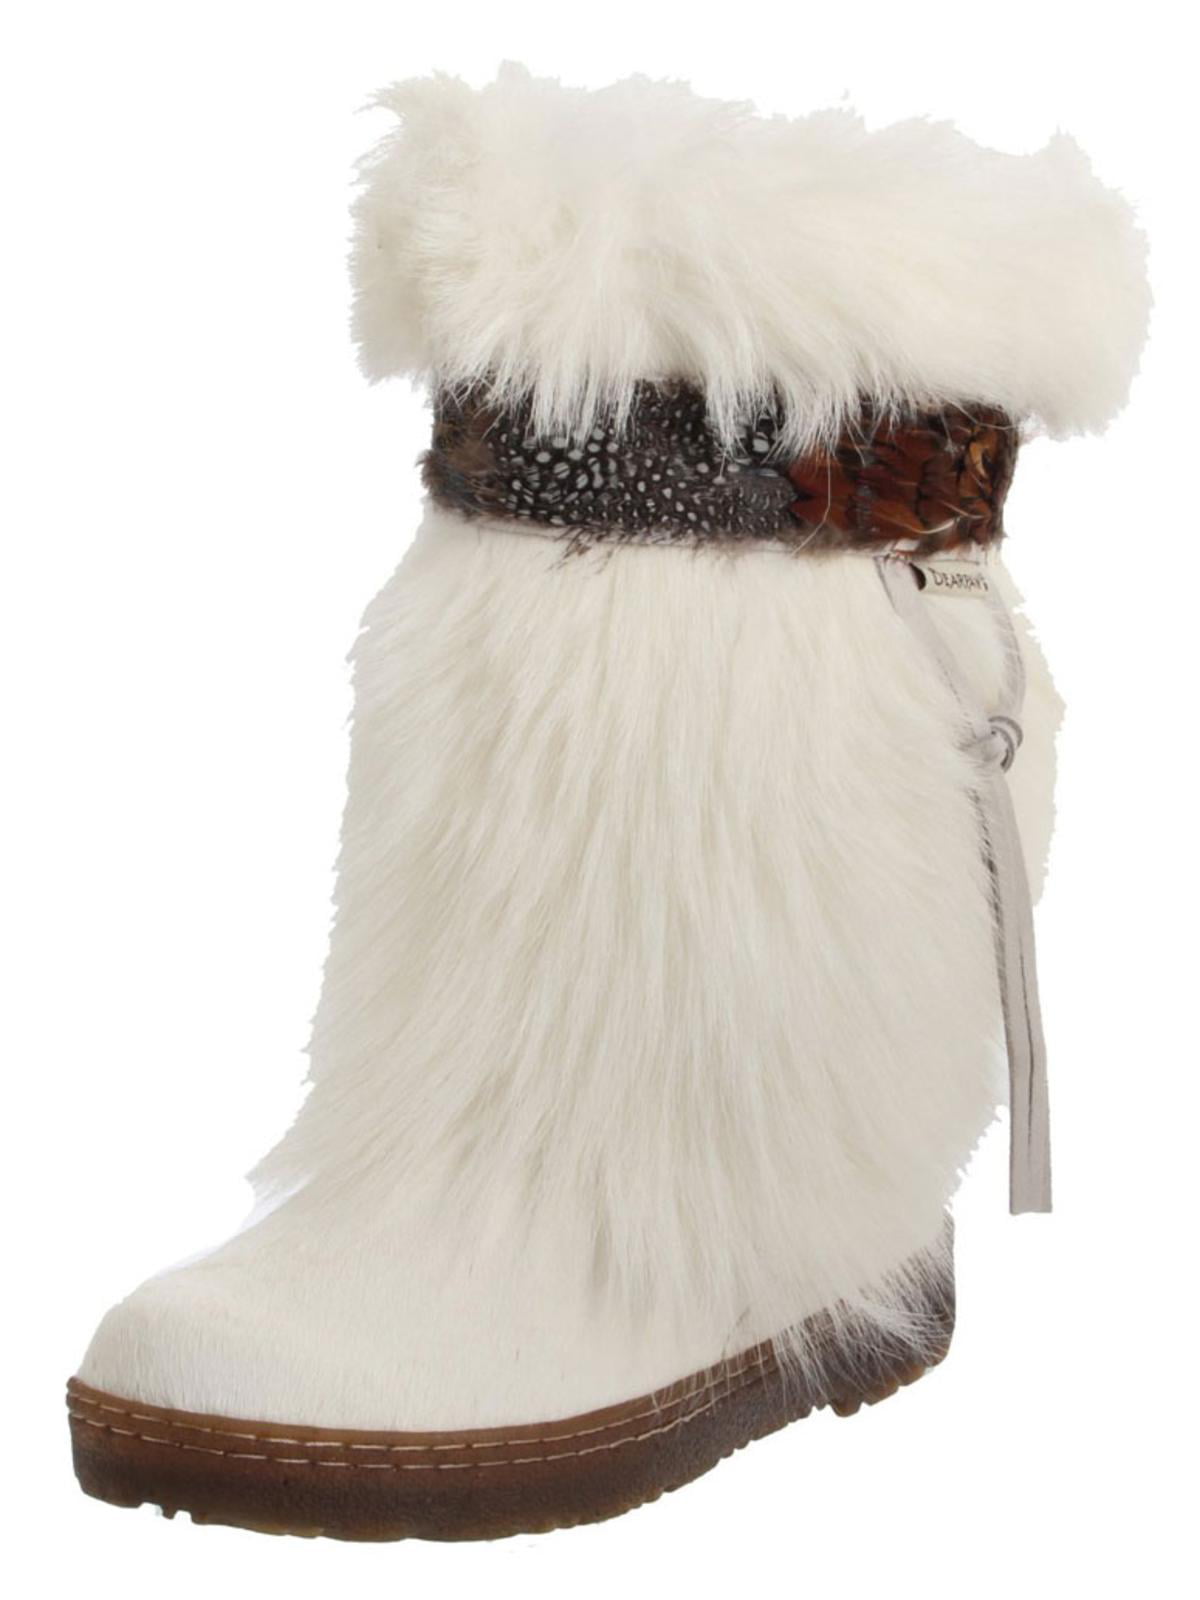 Buy > bear paws winter boots > in stock